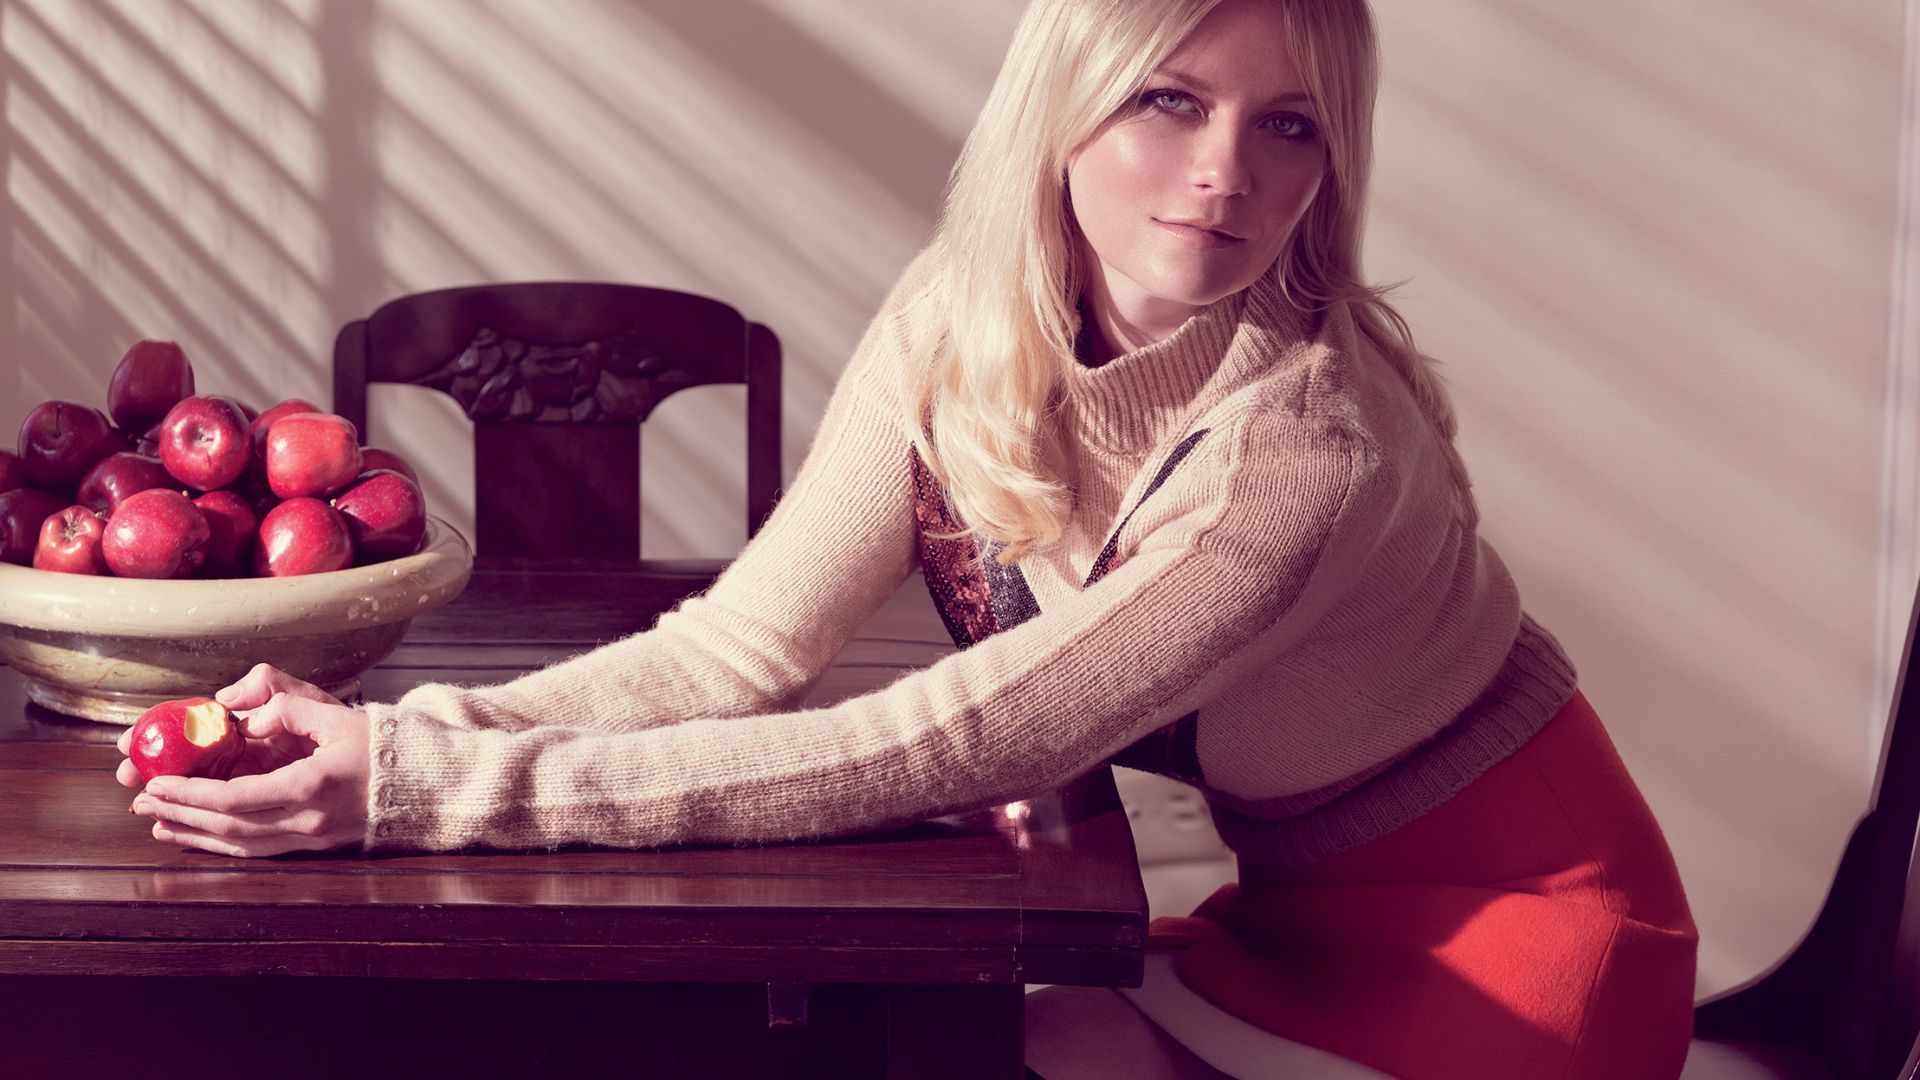 Kirsten Dunst sitting on a dining table while holding an apple